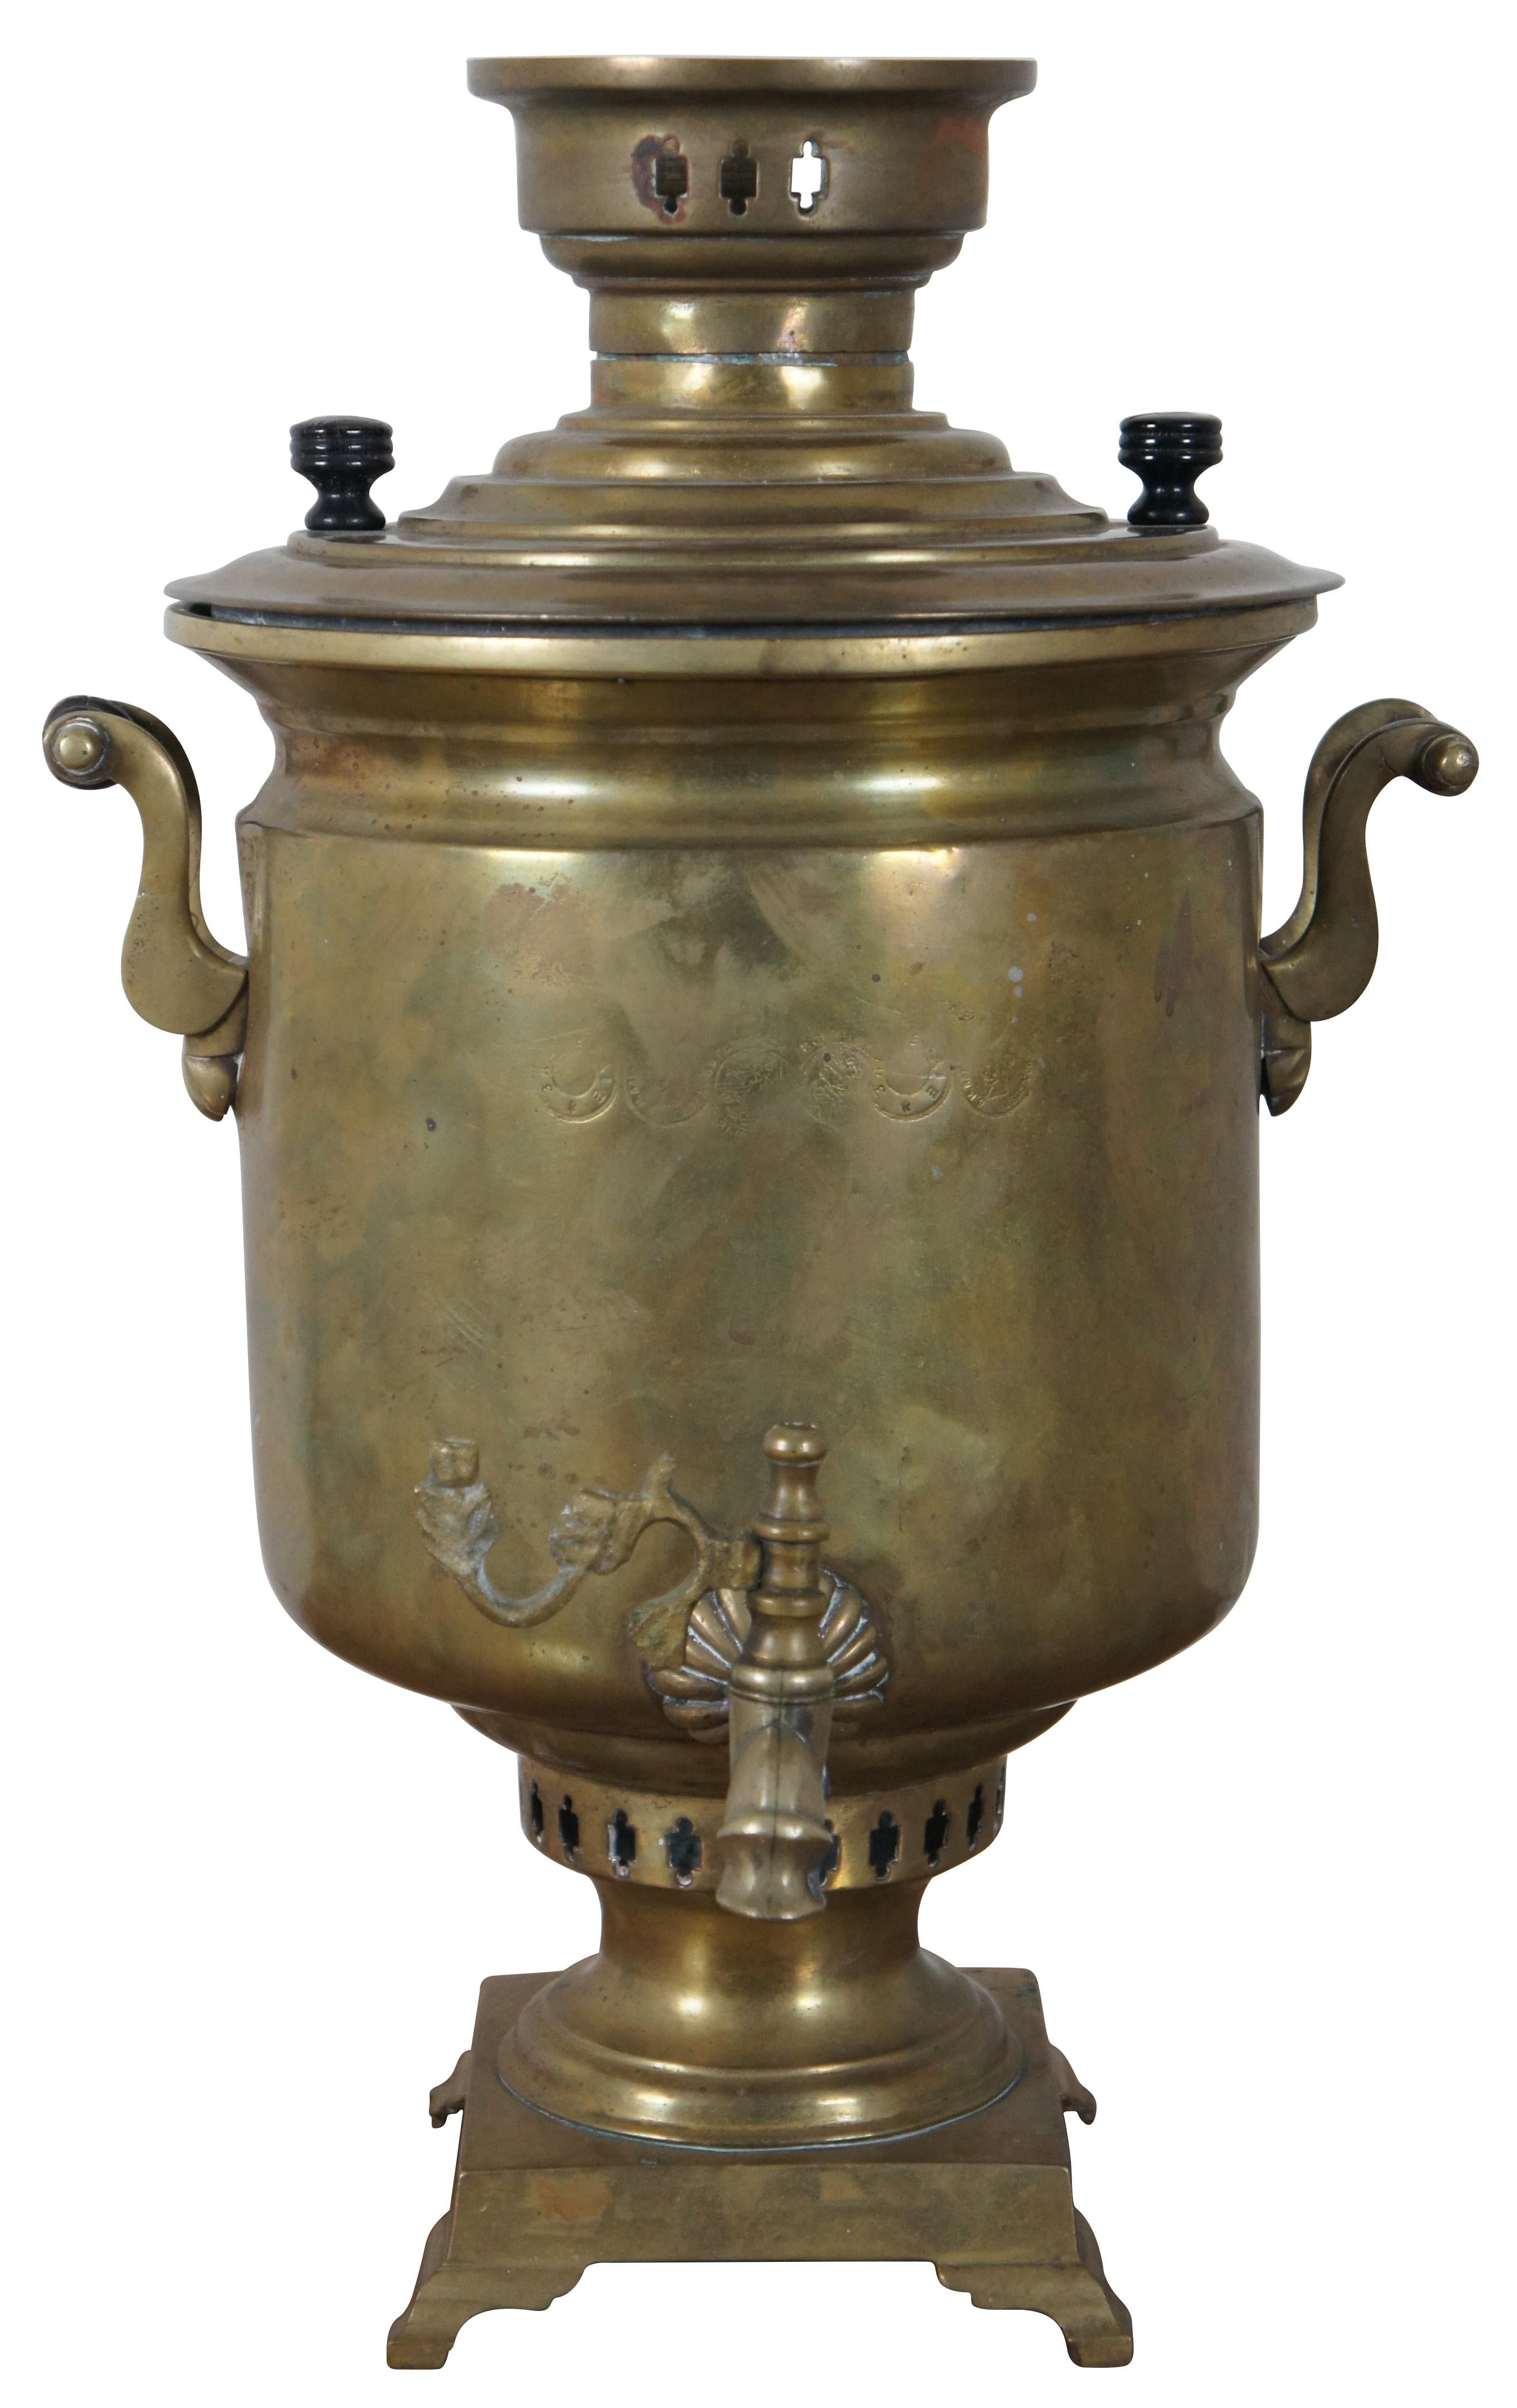 Antique Russian brass samovar / coffee or tea urn with wood handles.